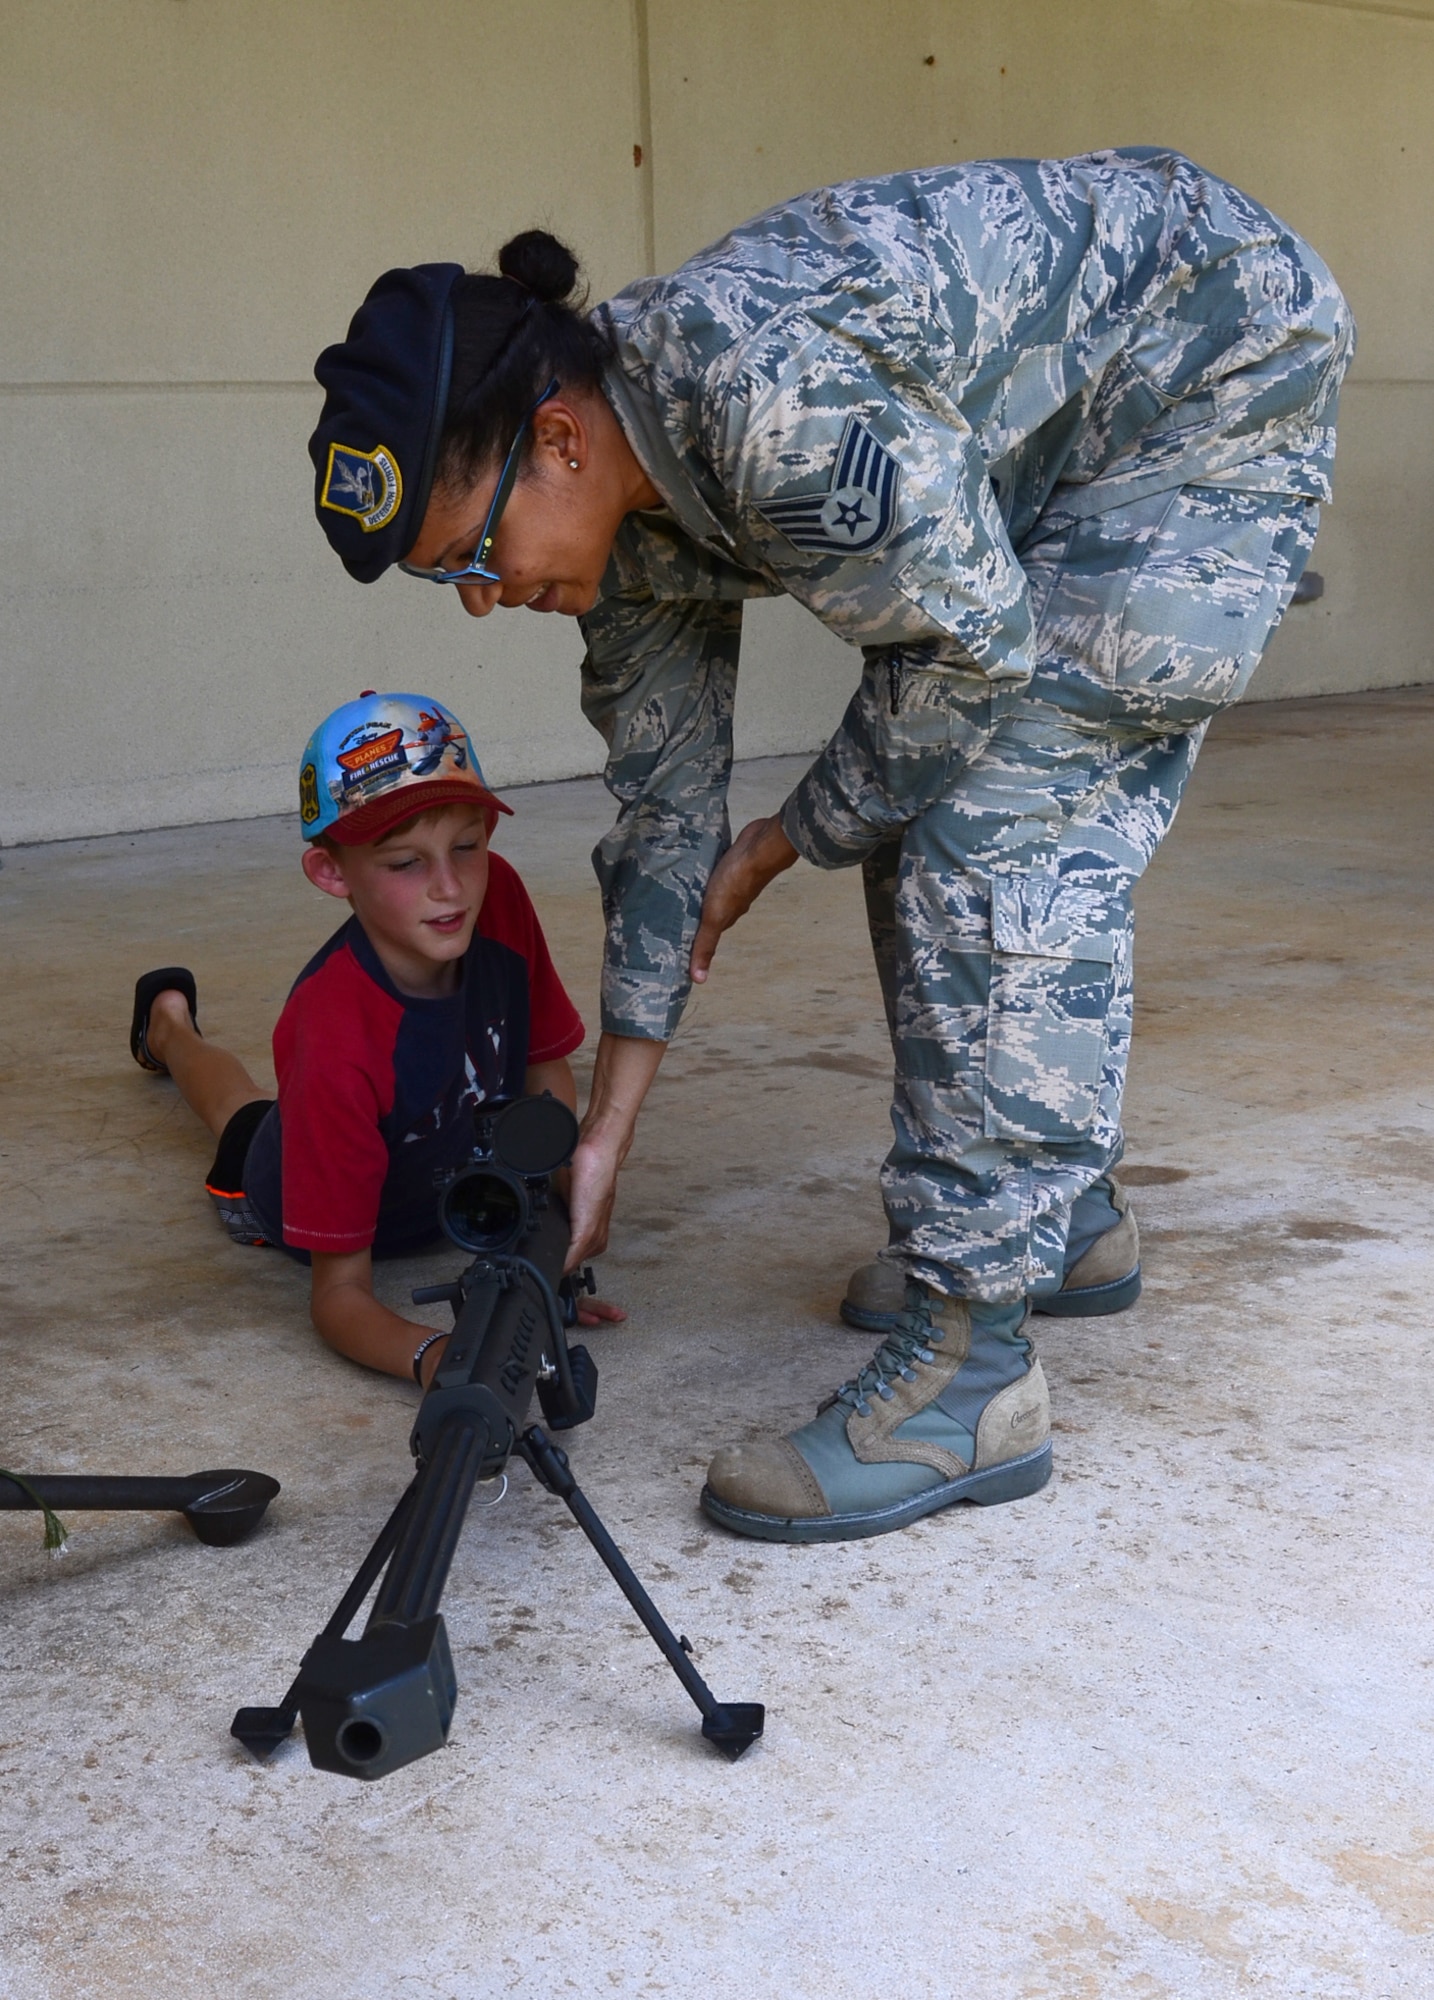 Staff Sgt. Yerida Vazquez, 36th Security Forces Squadron combat arms instructor introduces a young base resident to a .50-caliber rifle, May 12, 2015, at Andersen Air Force Base, Guam. The 36th SFS Airmen participated in skills display, which included multiple police weapons and a Humvee at the Exchange at Andersen AFB, in recognition of National Police Week. (U.S. Air Force photo by Airman 1st Class Alexa Ann Henderson/Released)